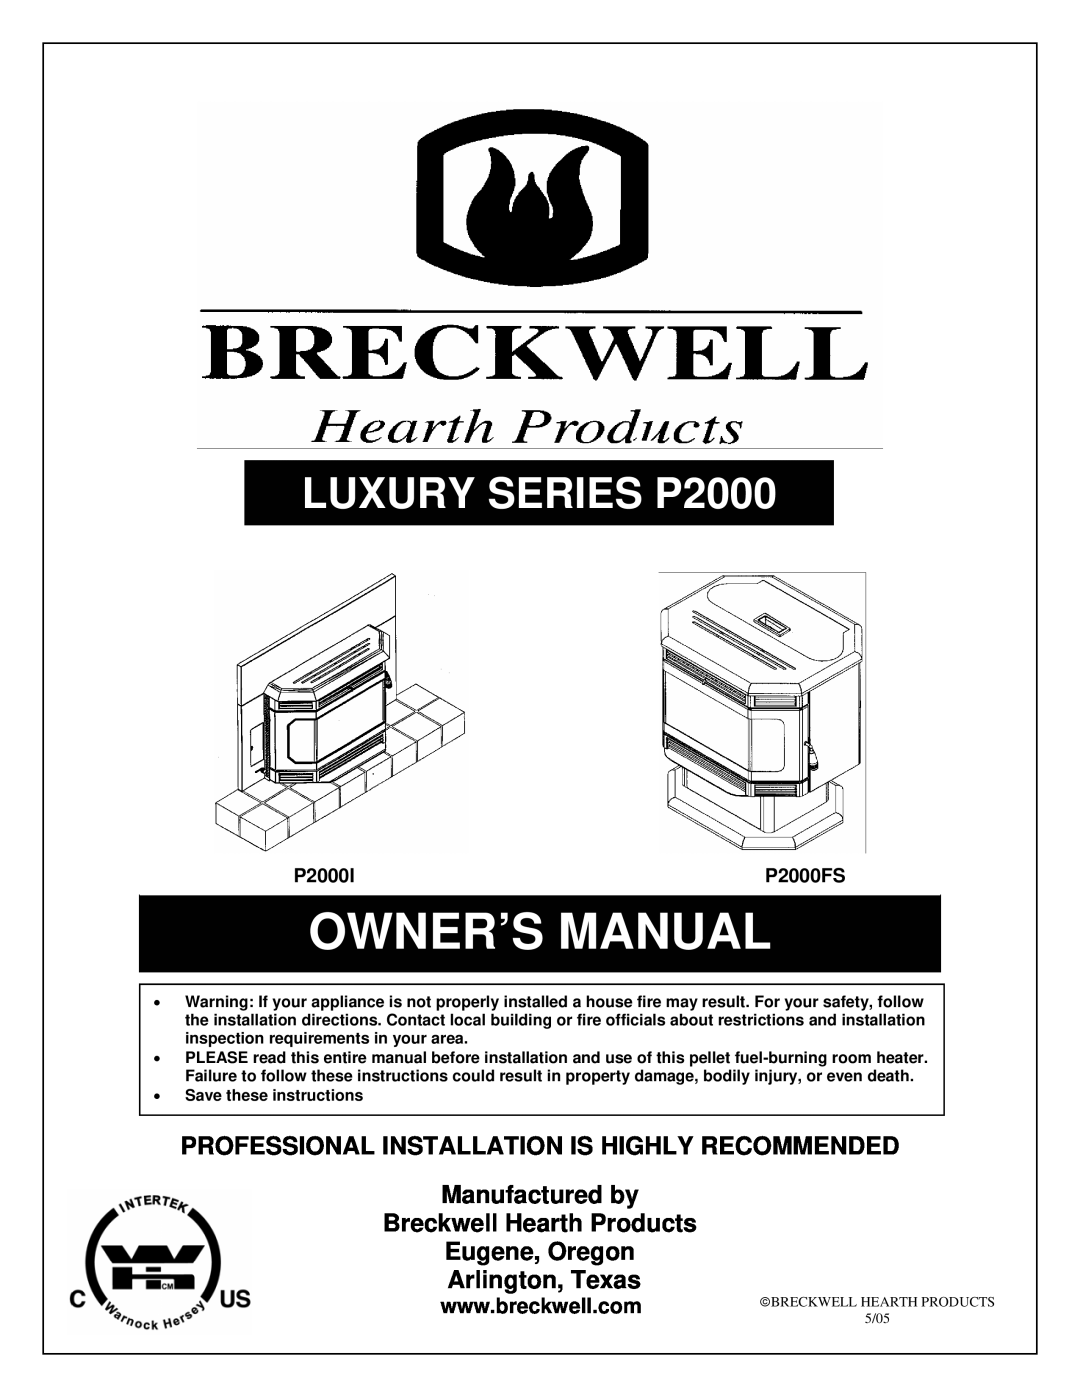 Breckwell P2000FS owner manual Professional Installation Is Highly Recommended, Manufactured by Breckwell Hearth Products 